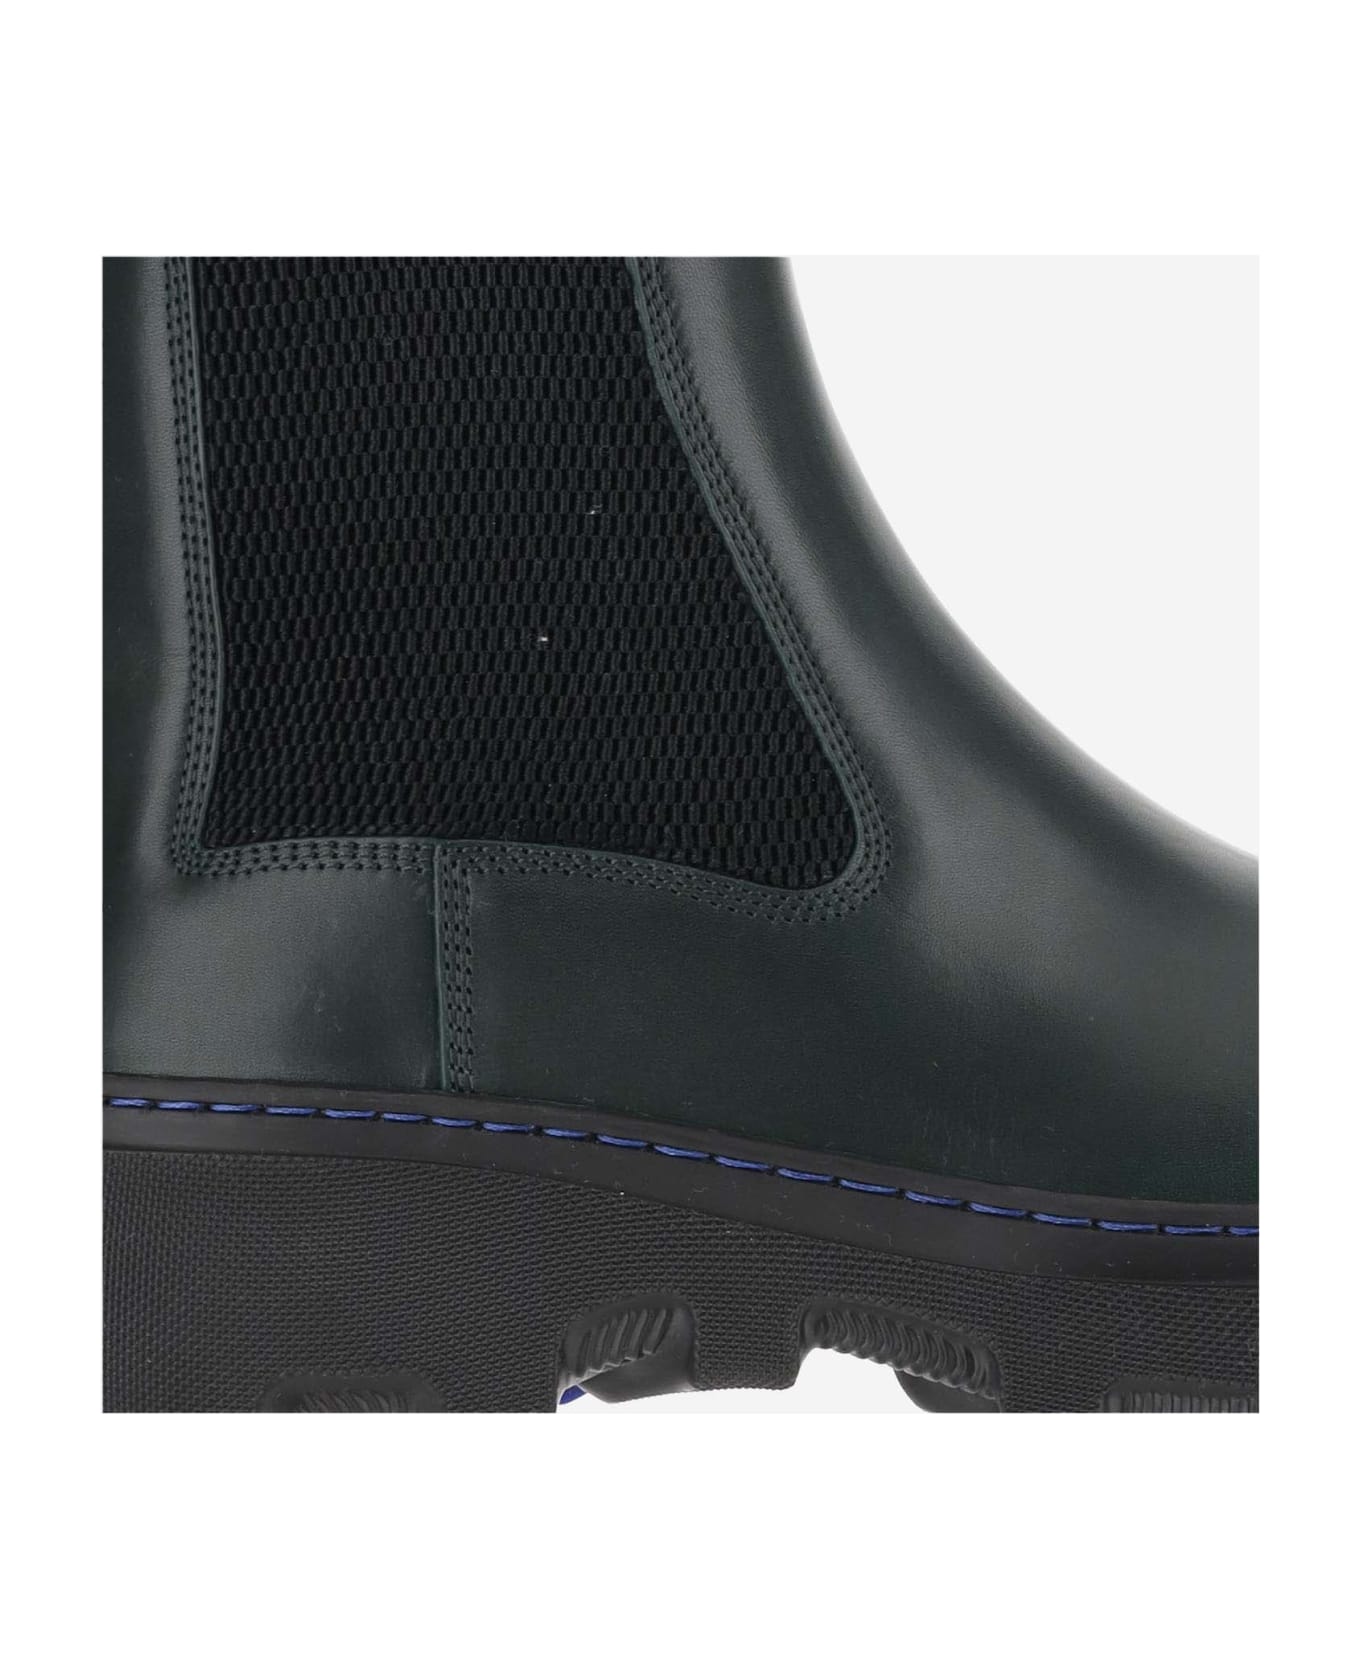 Burberry Leather Creeper Chelsea Boots - Vine